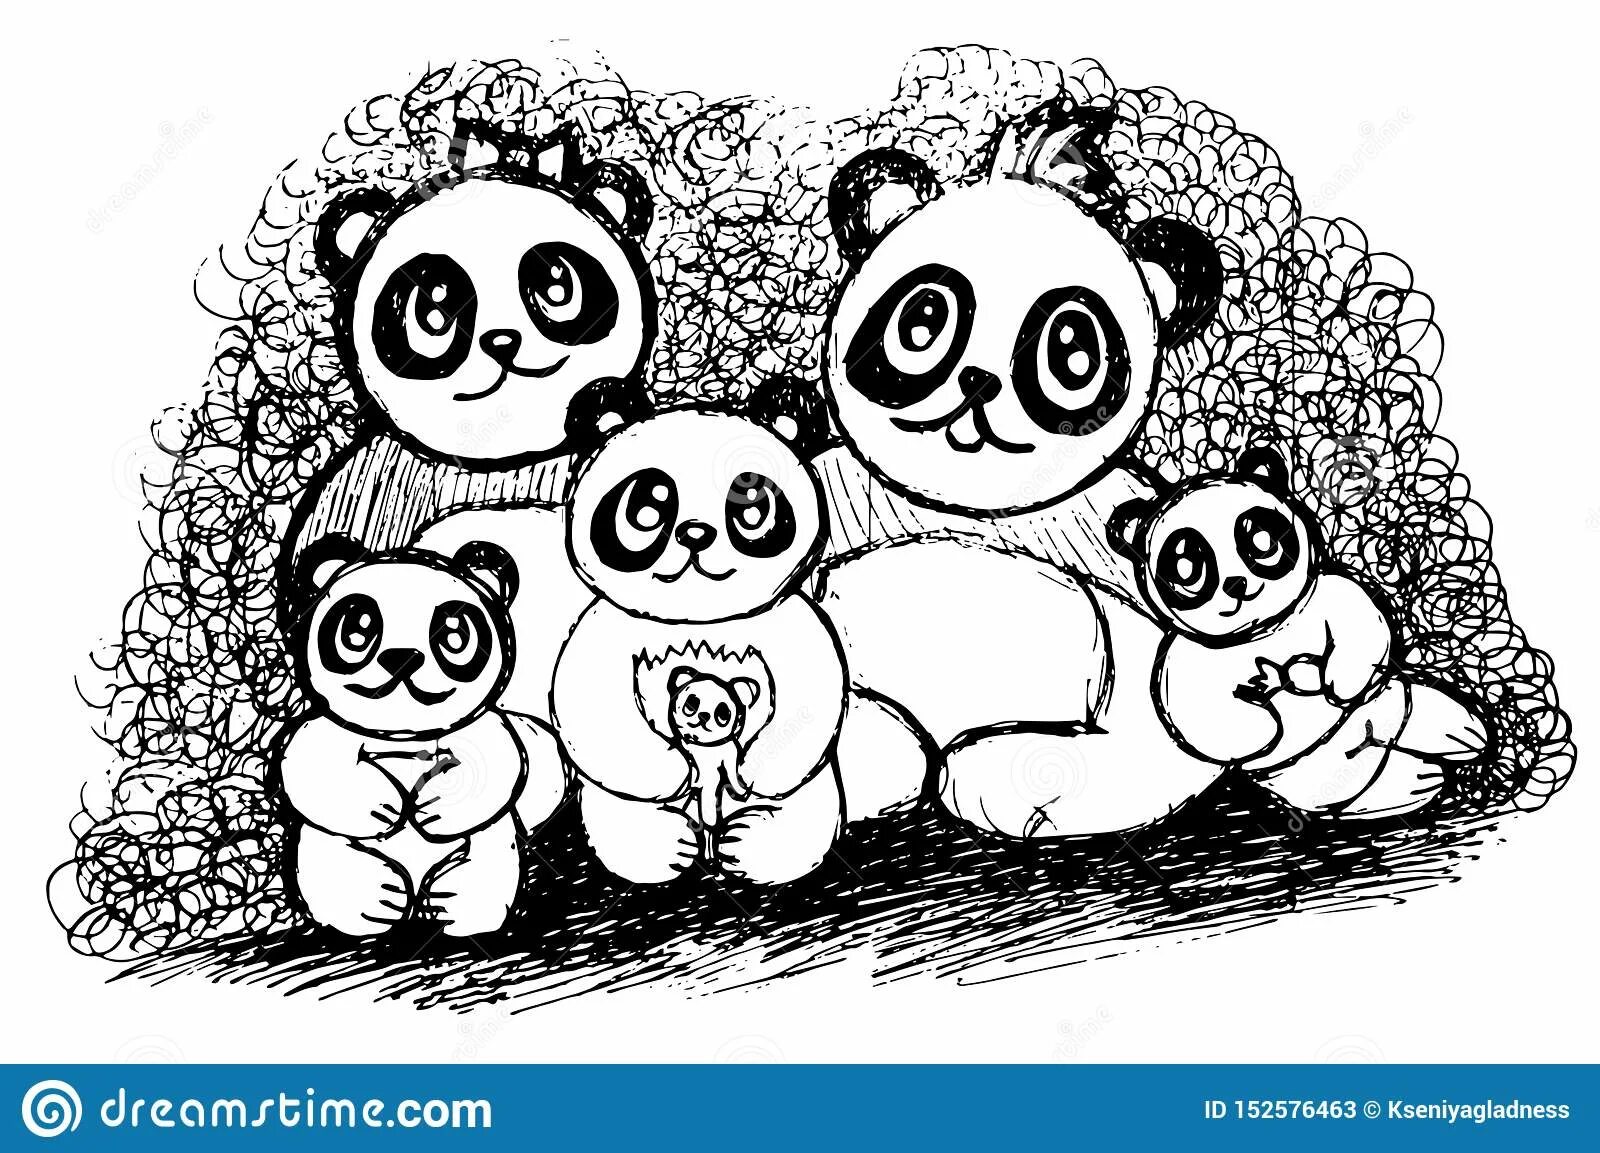 Colouring the irresistible little panda